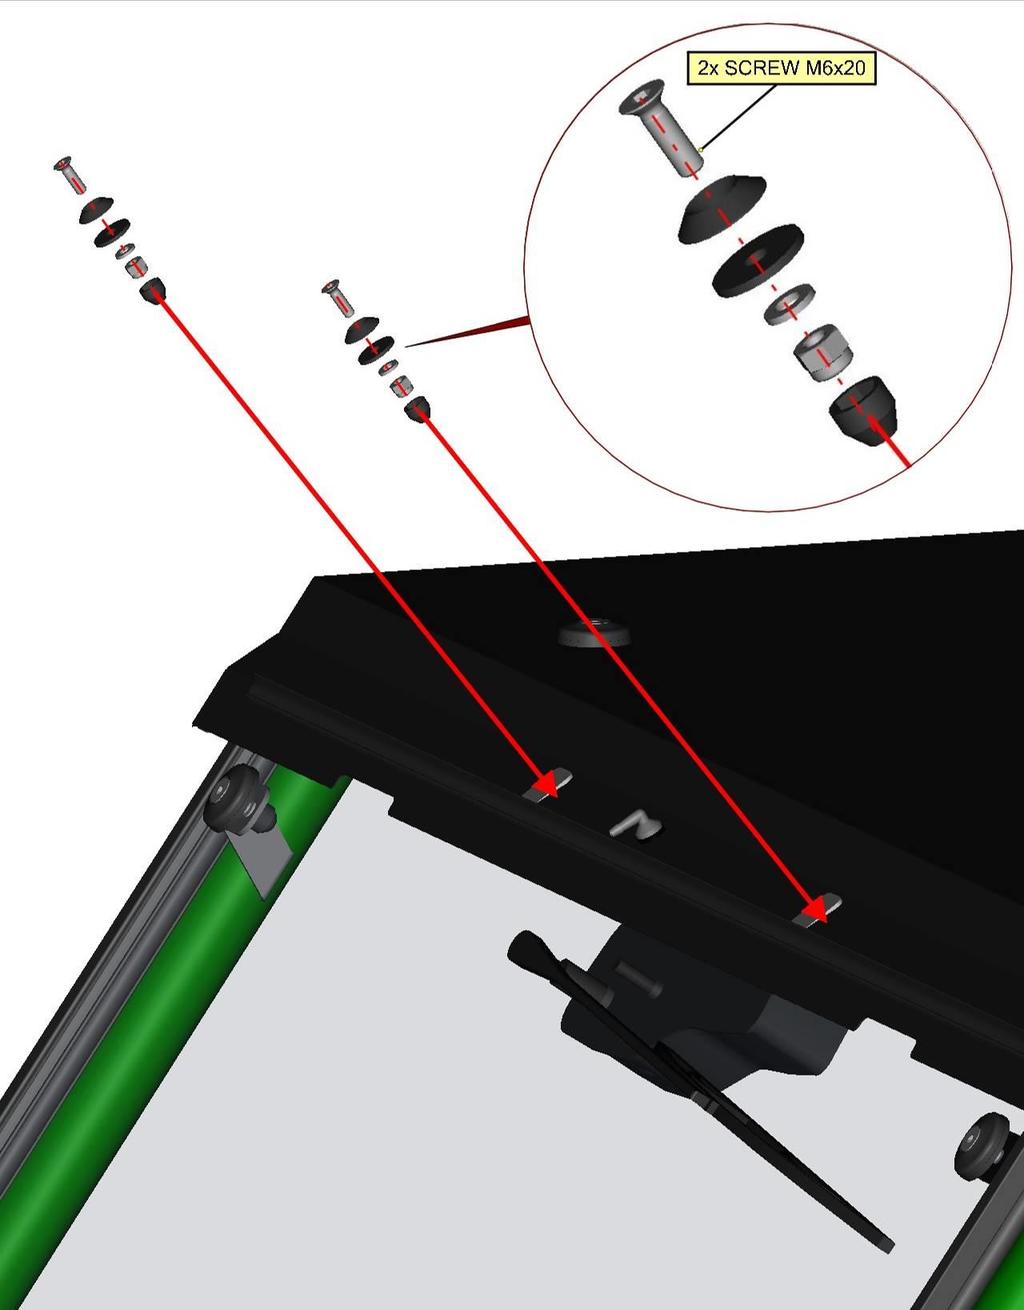 Fix the front panel upper holders with